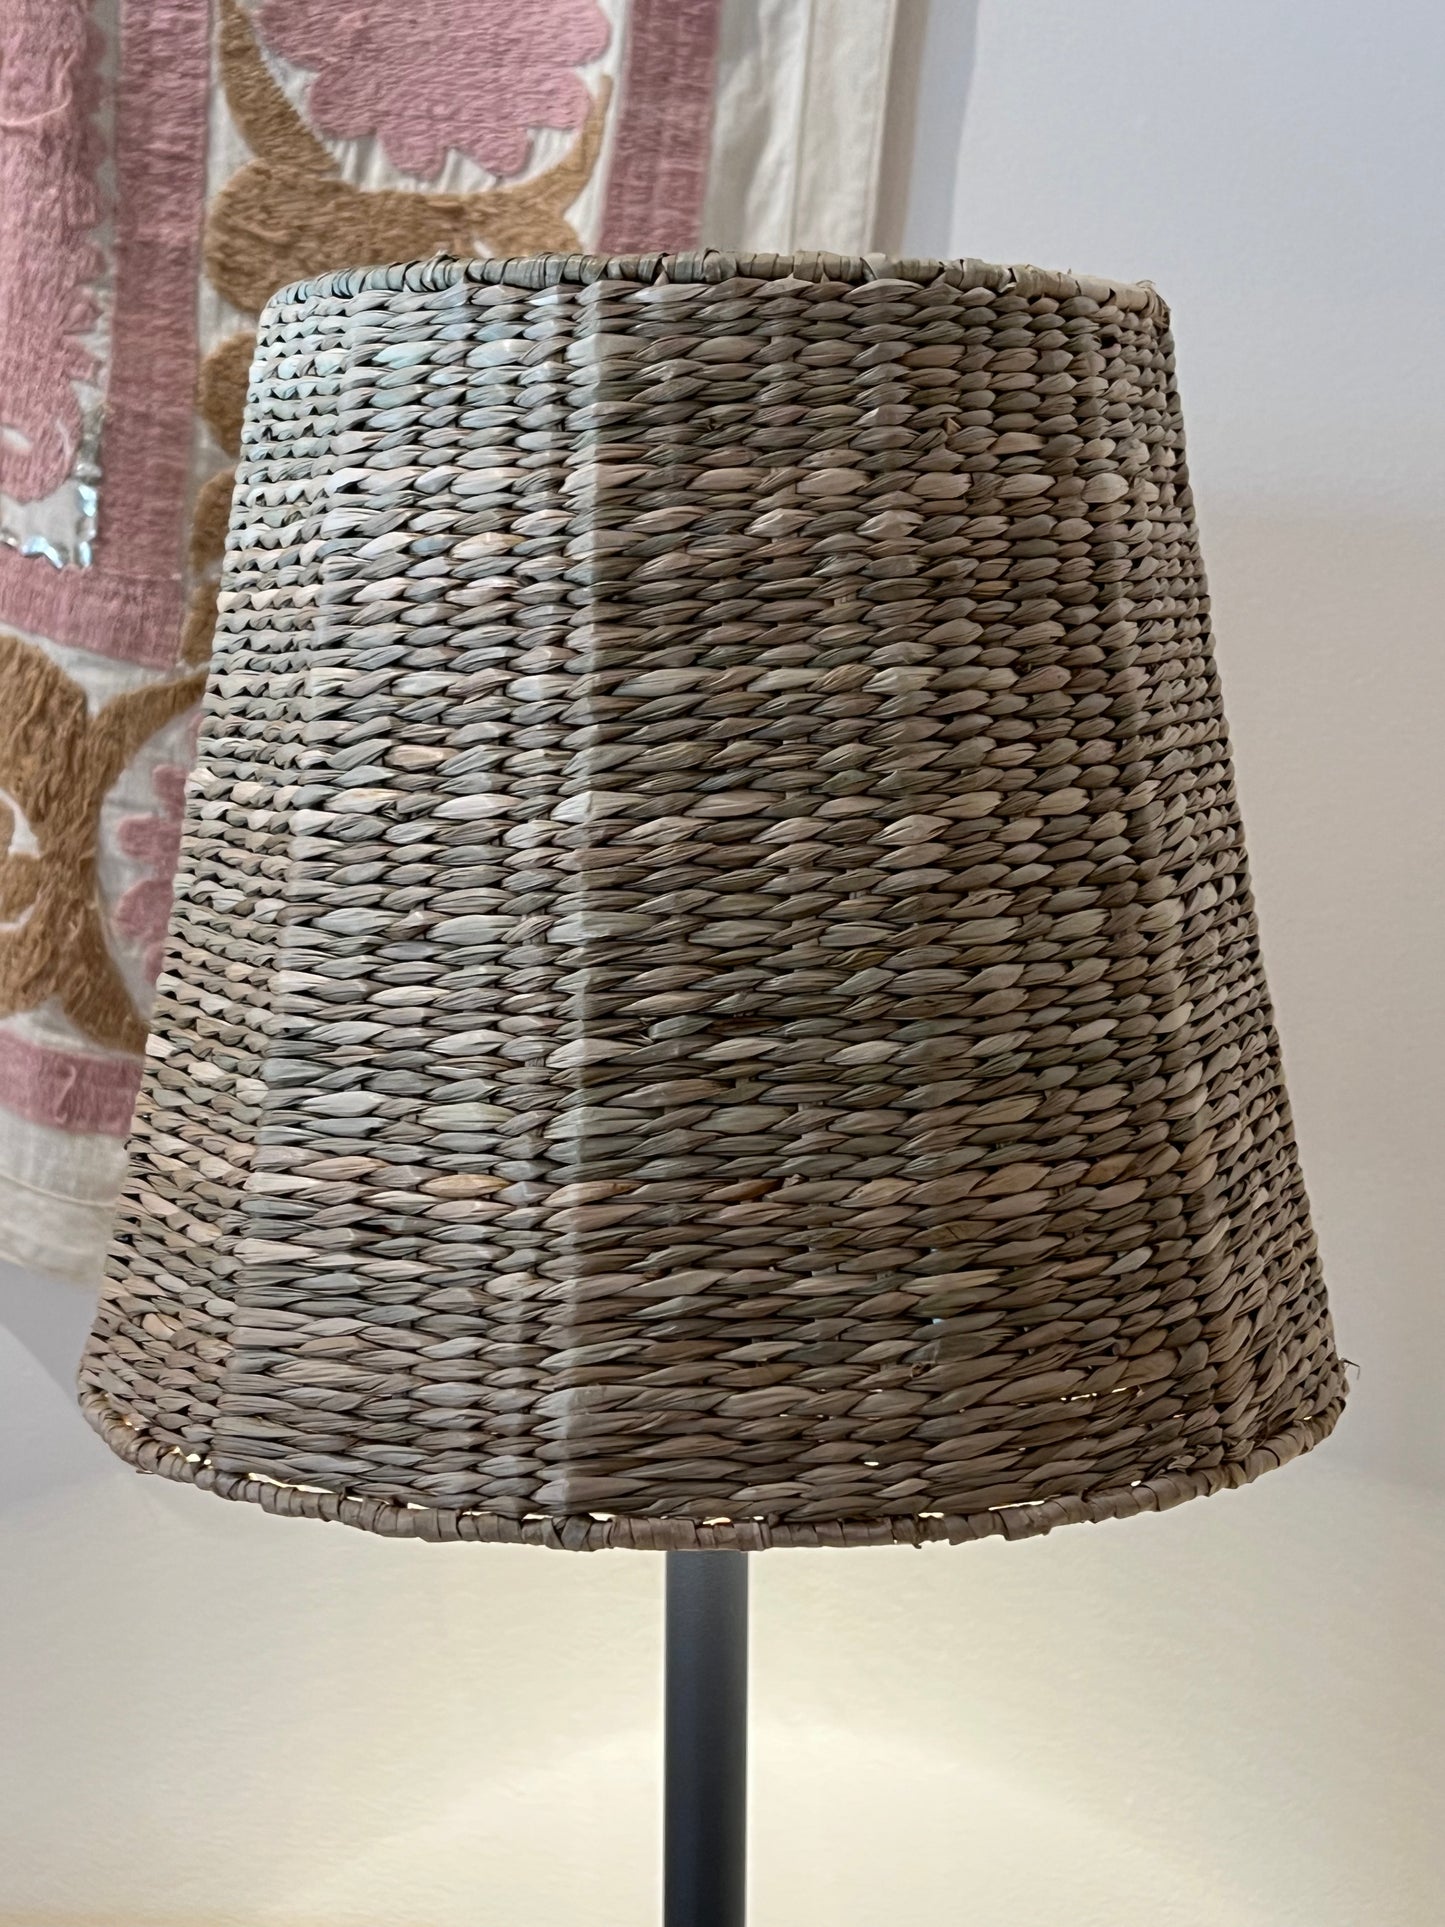 Large Hyacinth/Seagrass Shades for Poldina XXL Lamps